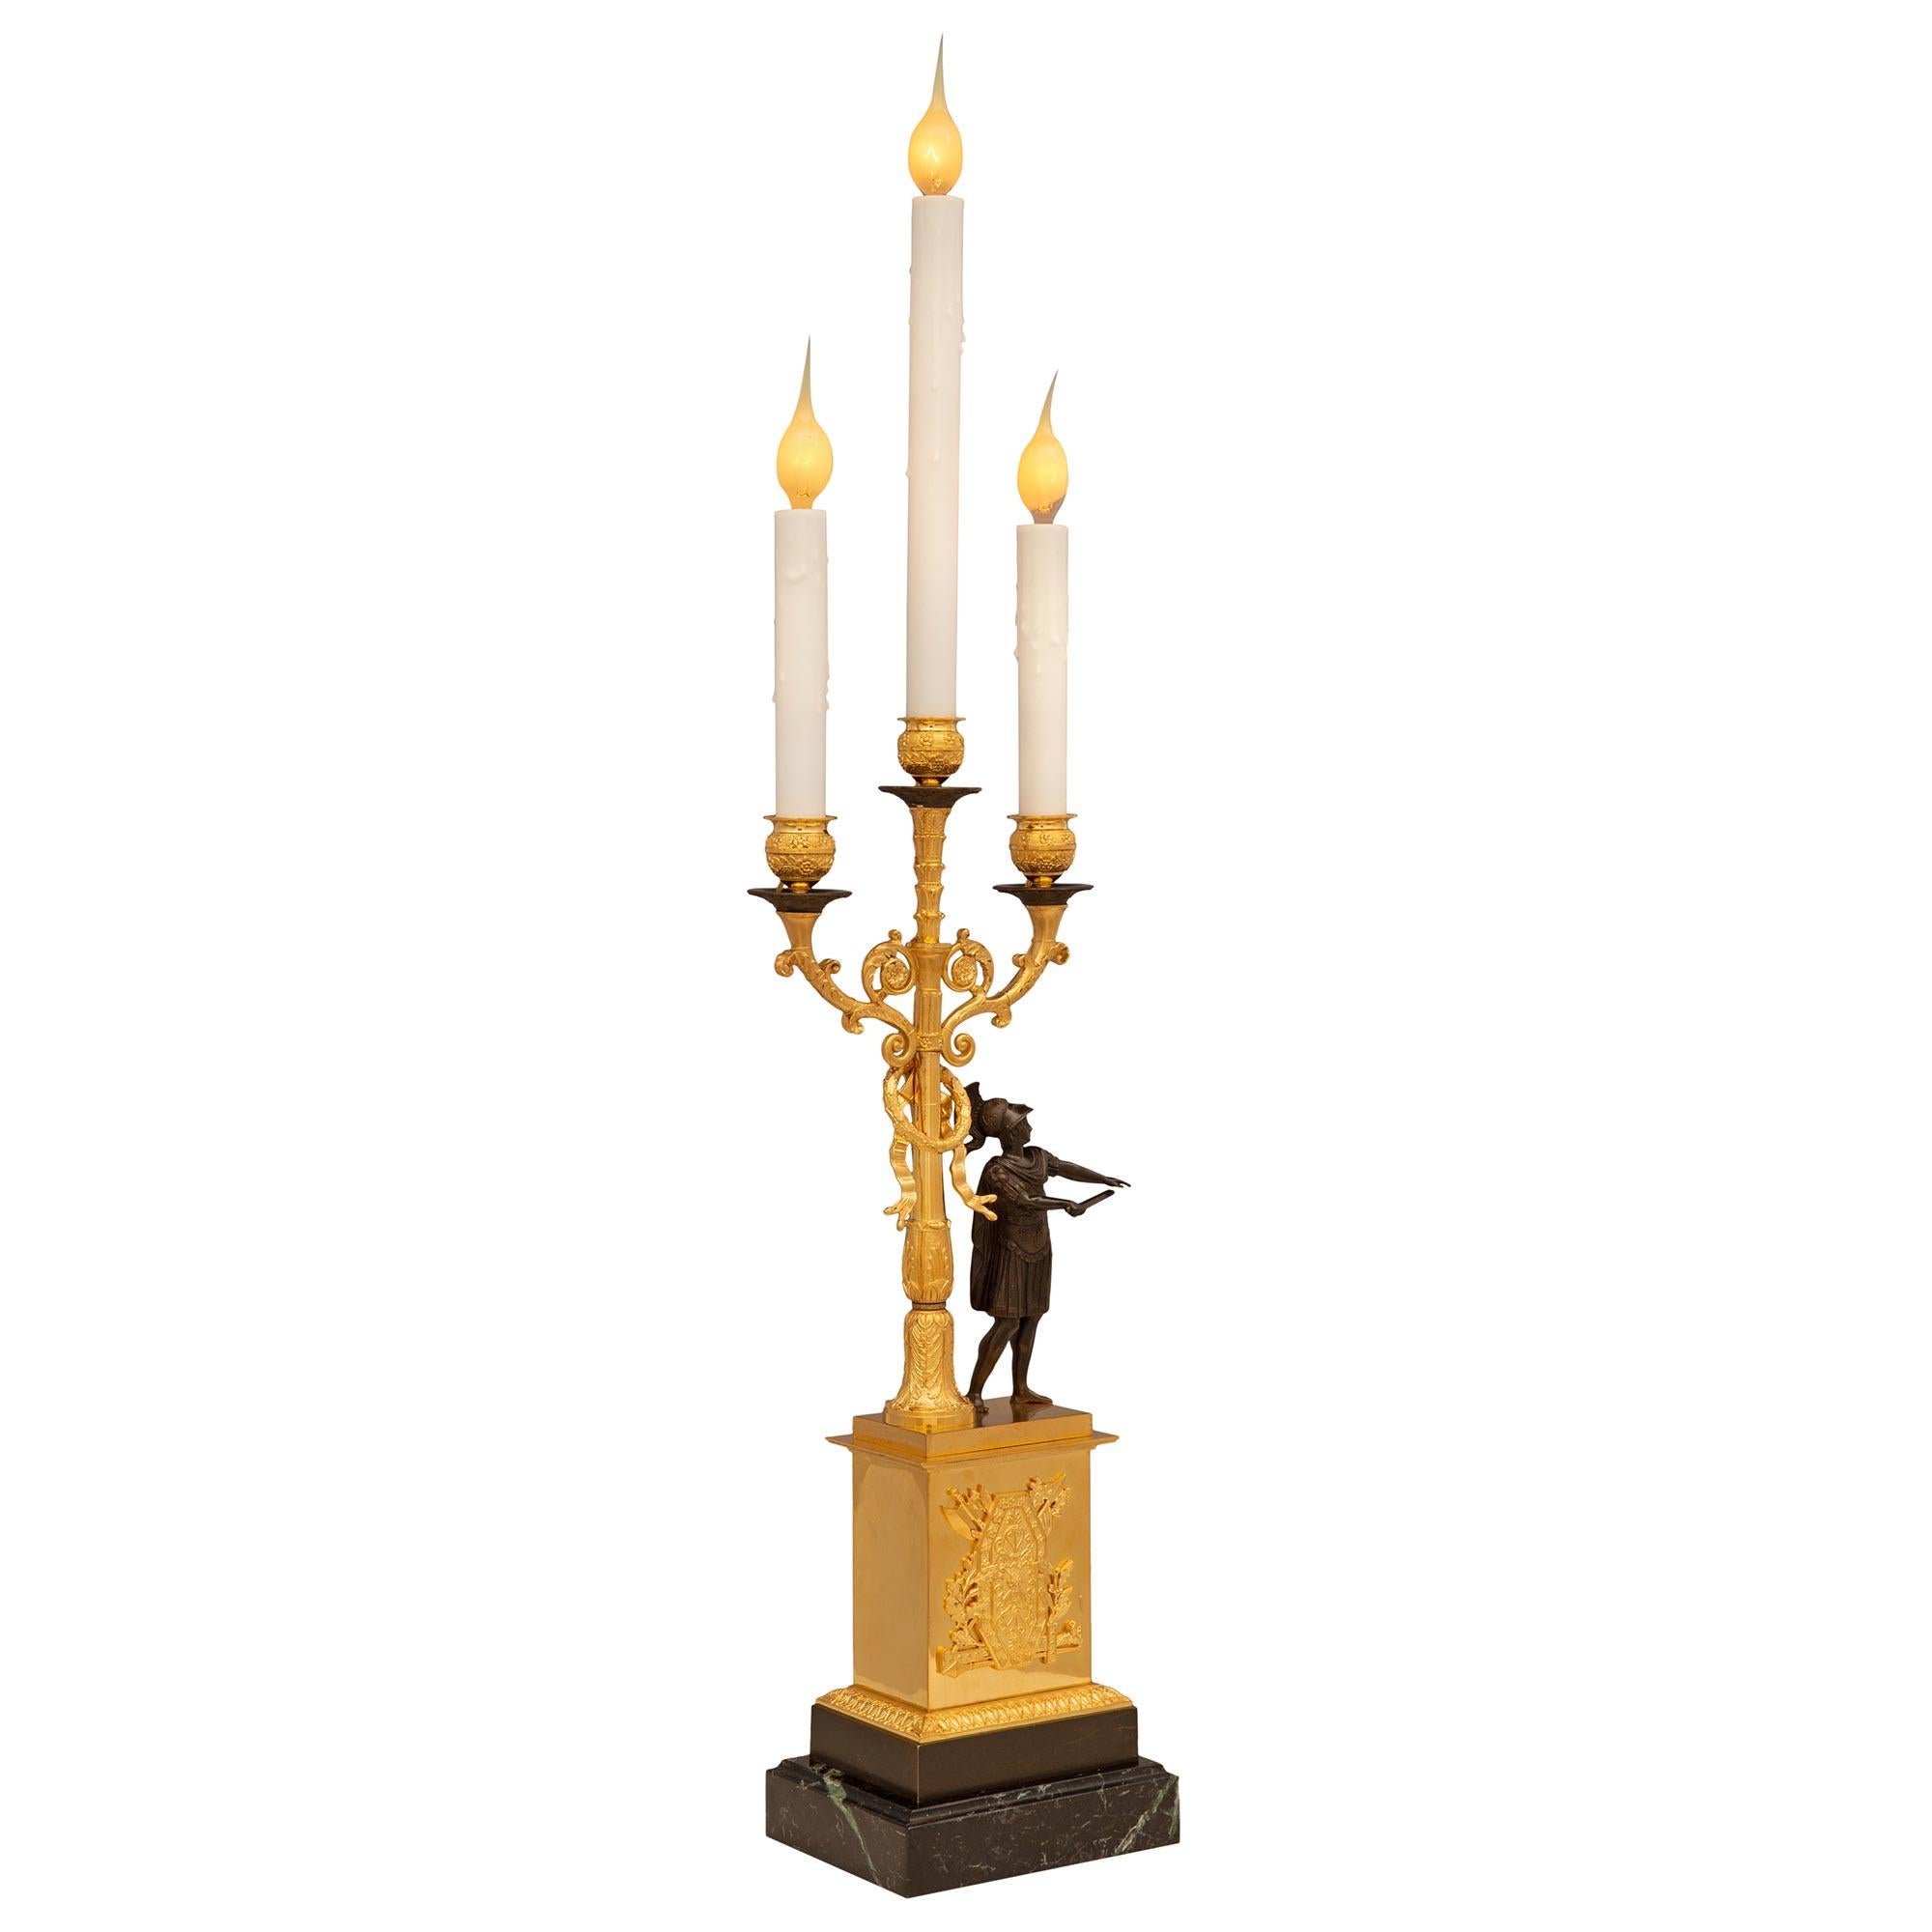 A remarkable true pair of French 19th century neo-Classical st. ormolu, patinated bronze and Vert de Patricia marble lamps. Each three arm candelabra lamp is raised by a rectangular Vert de Patricia base with a fine mottled border below the ormolu